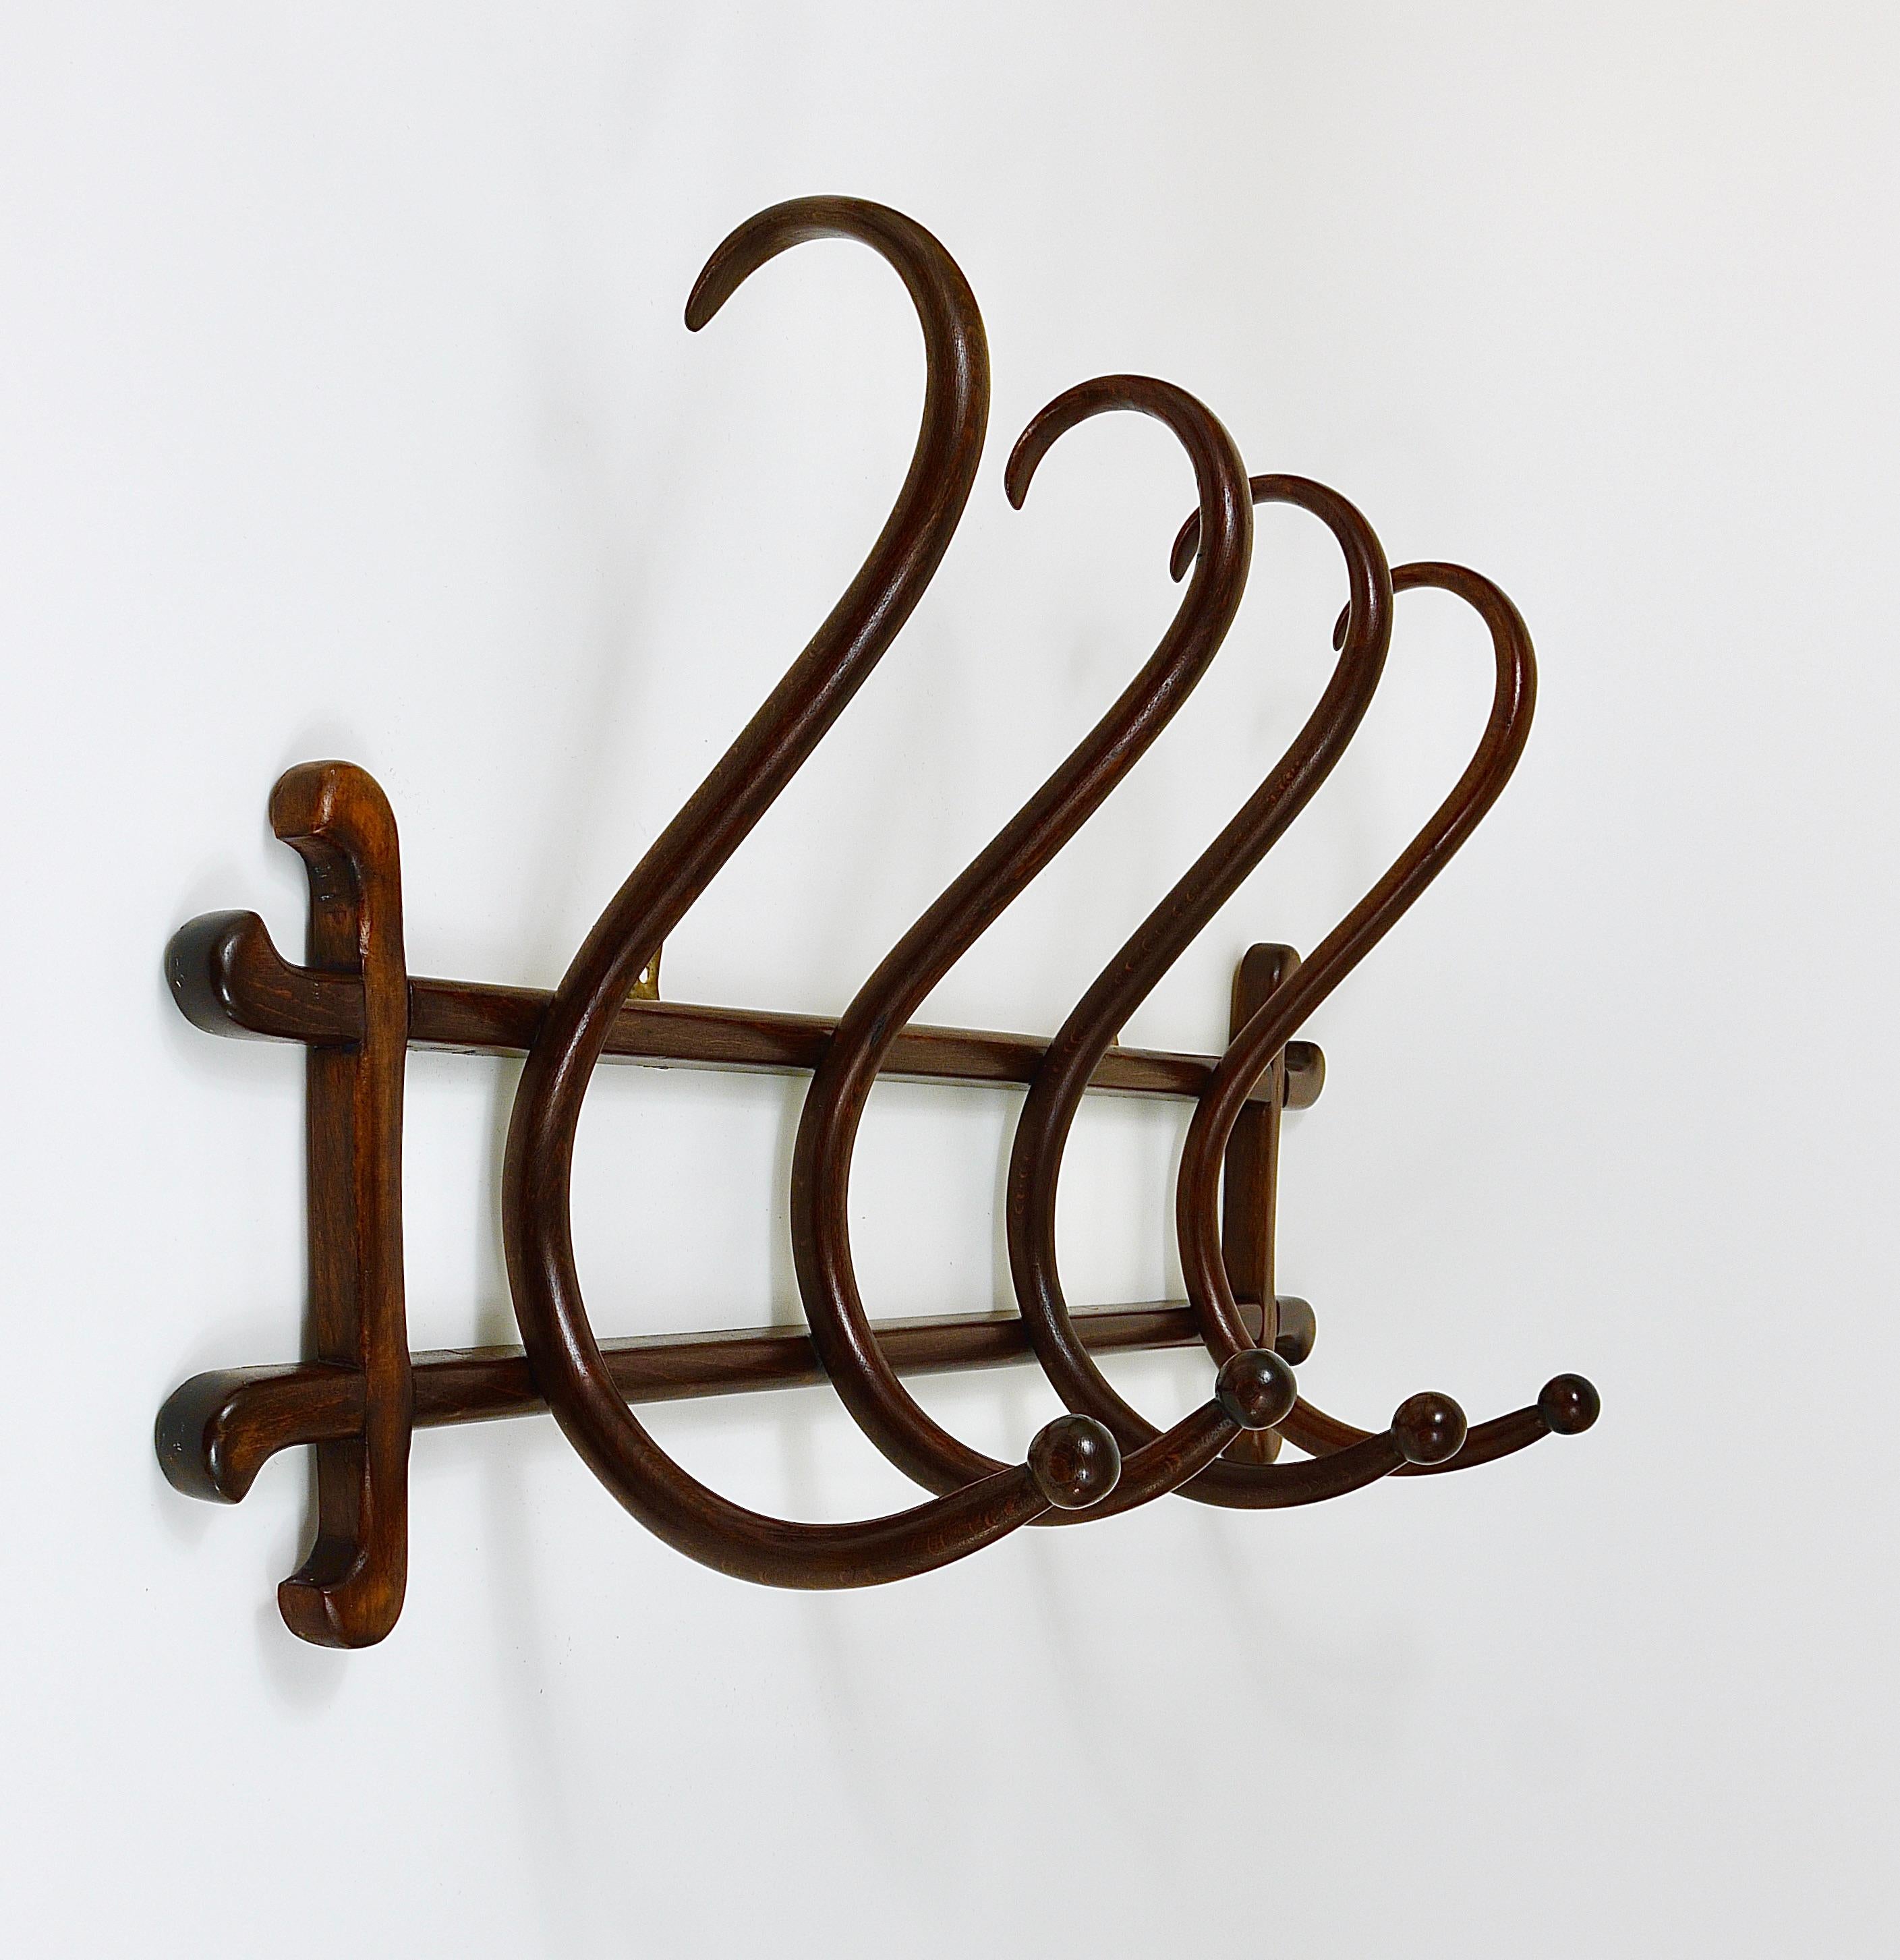 Early 20th Century 1900s Thonet Art Nouveau Secession Bentwood Wall Coat Rack with four Hangers